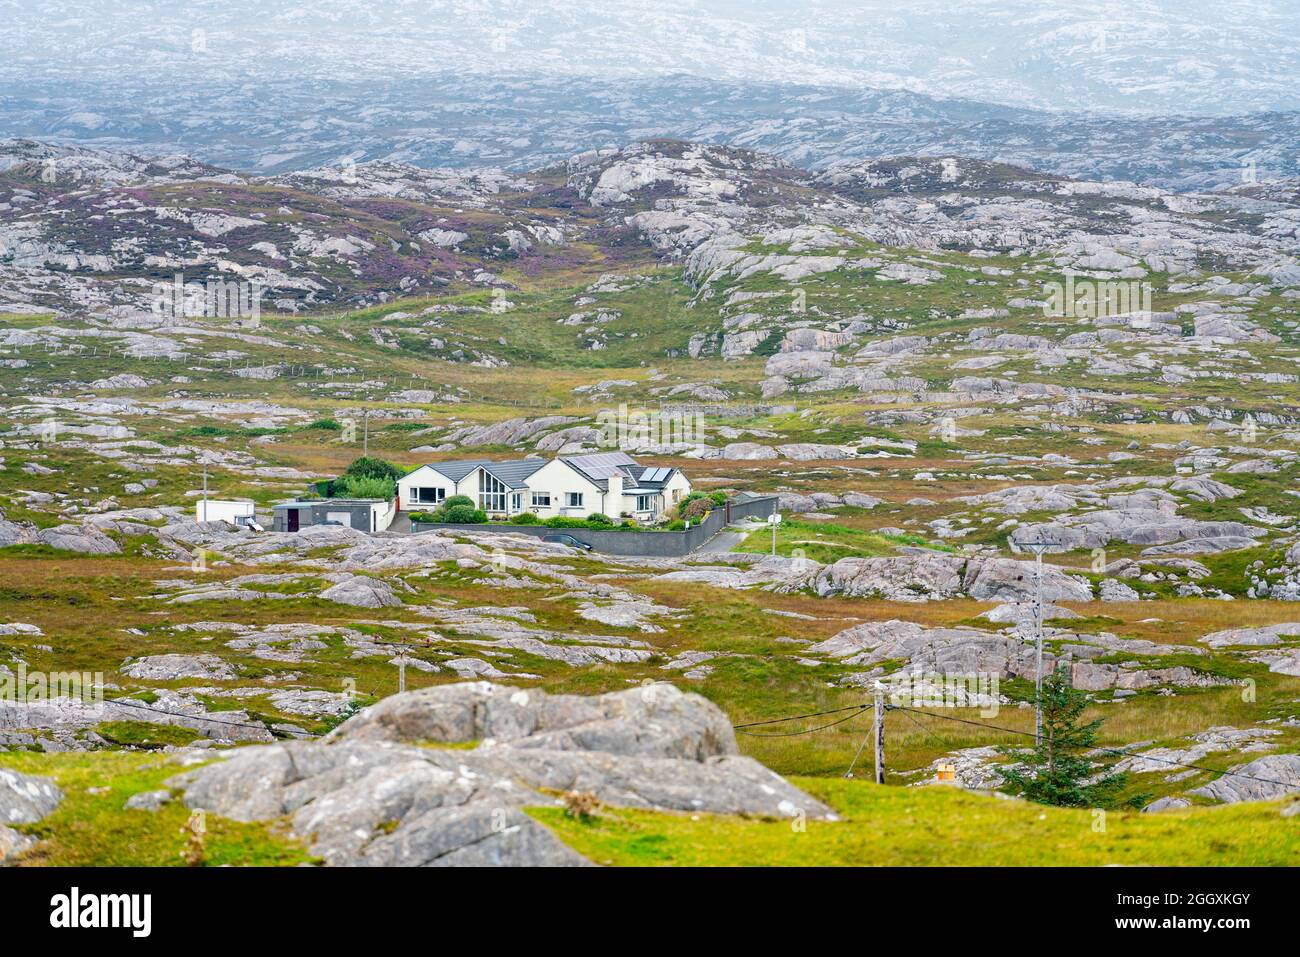 View of on solitary house amongst rocky barren landscape on The Bays on East coast of Isle of Harris, Outer Hebrides, Scotland, UK Stock Photo